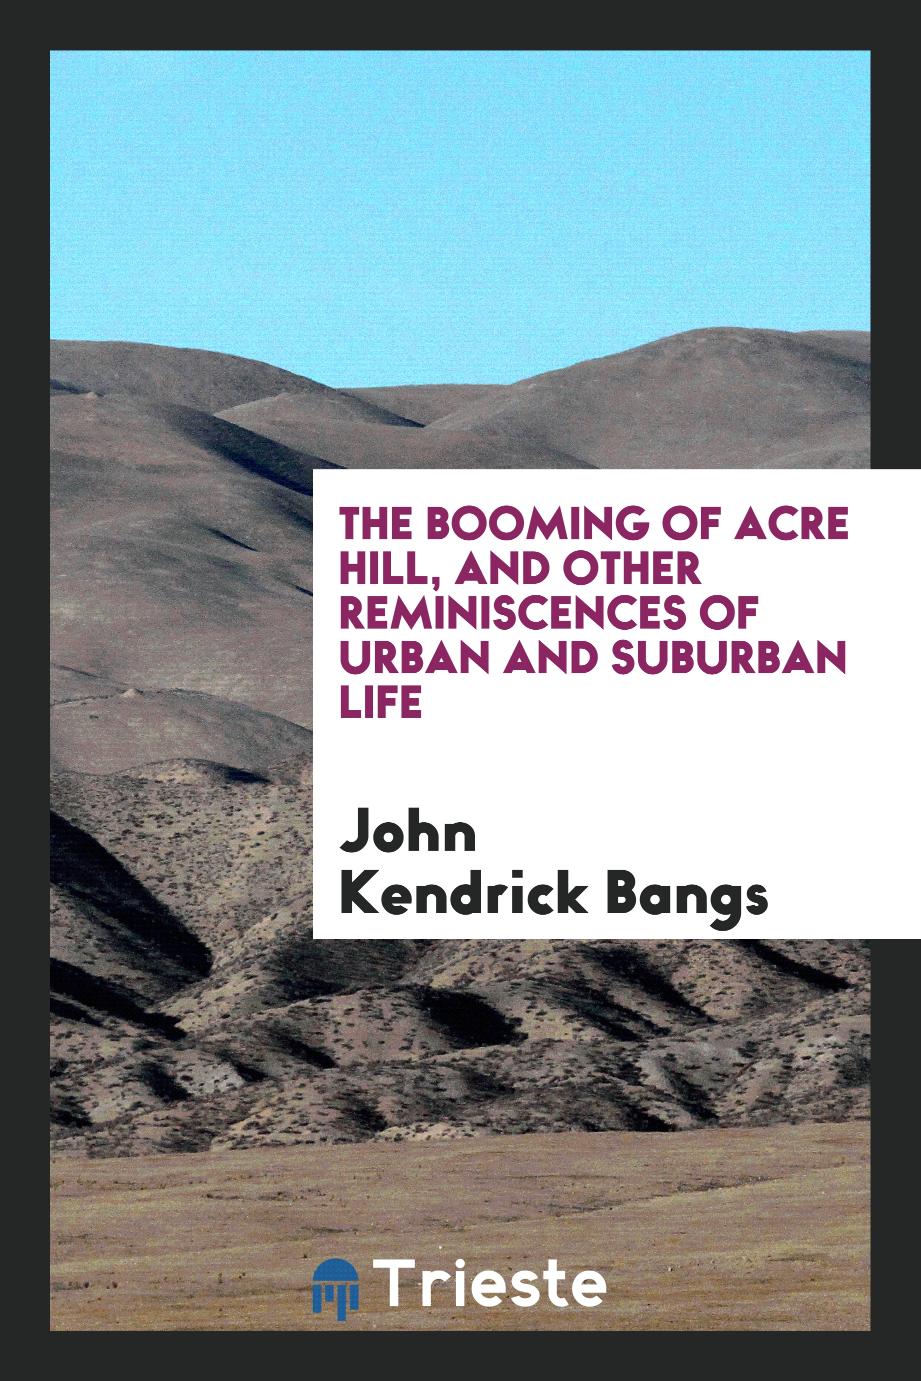 The Booming of Acre Hill, and Other Reminiscences of Urban and Suburban Life